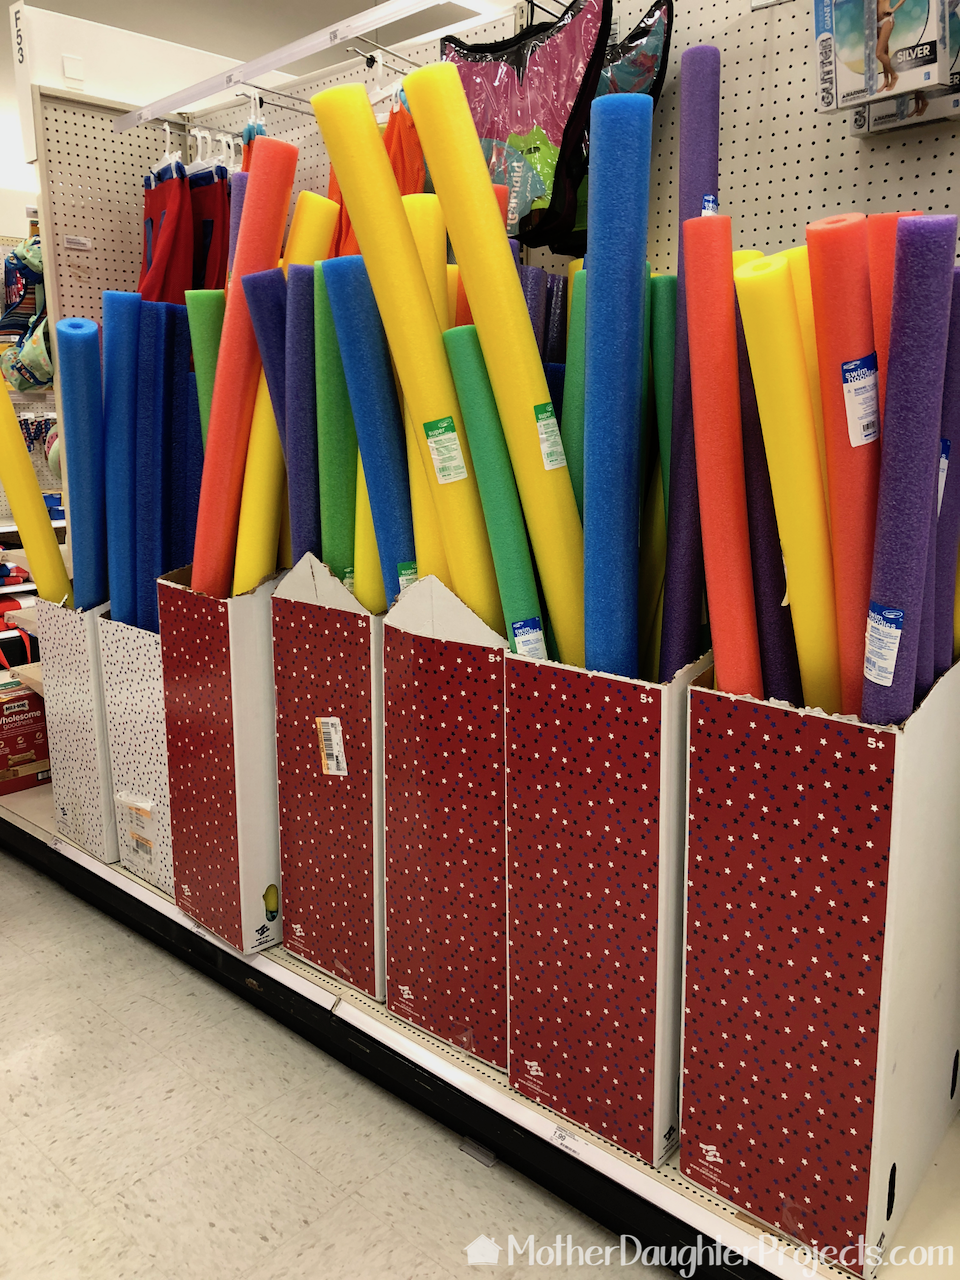 The pool noodles in the Target display.